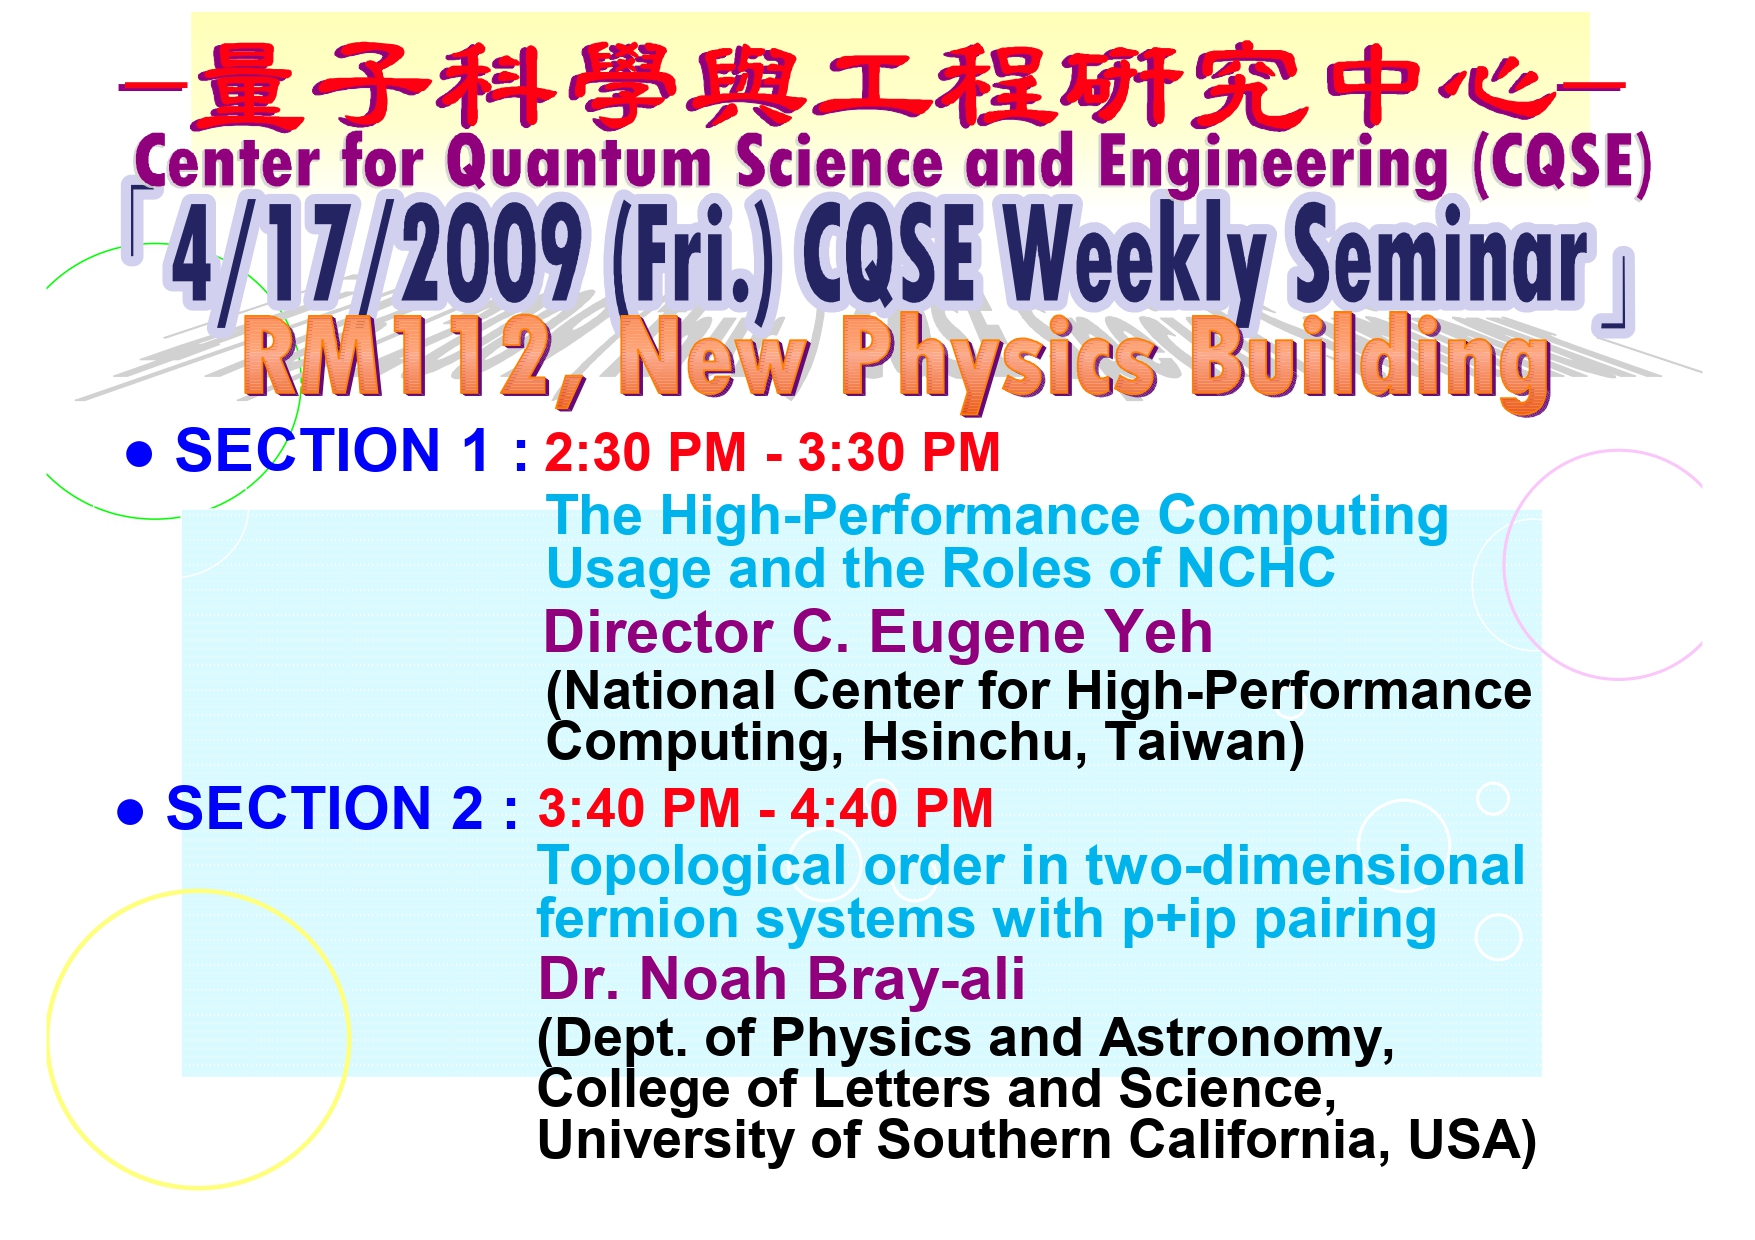 Weekly/Special Seminar of Center for Quantum Science and Engineering (CQSE)